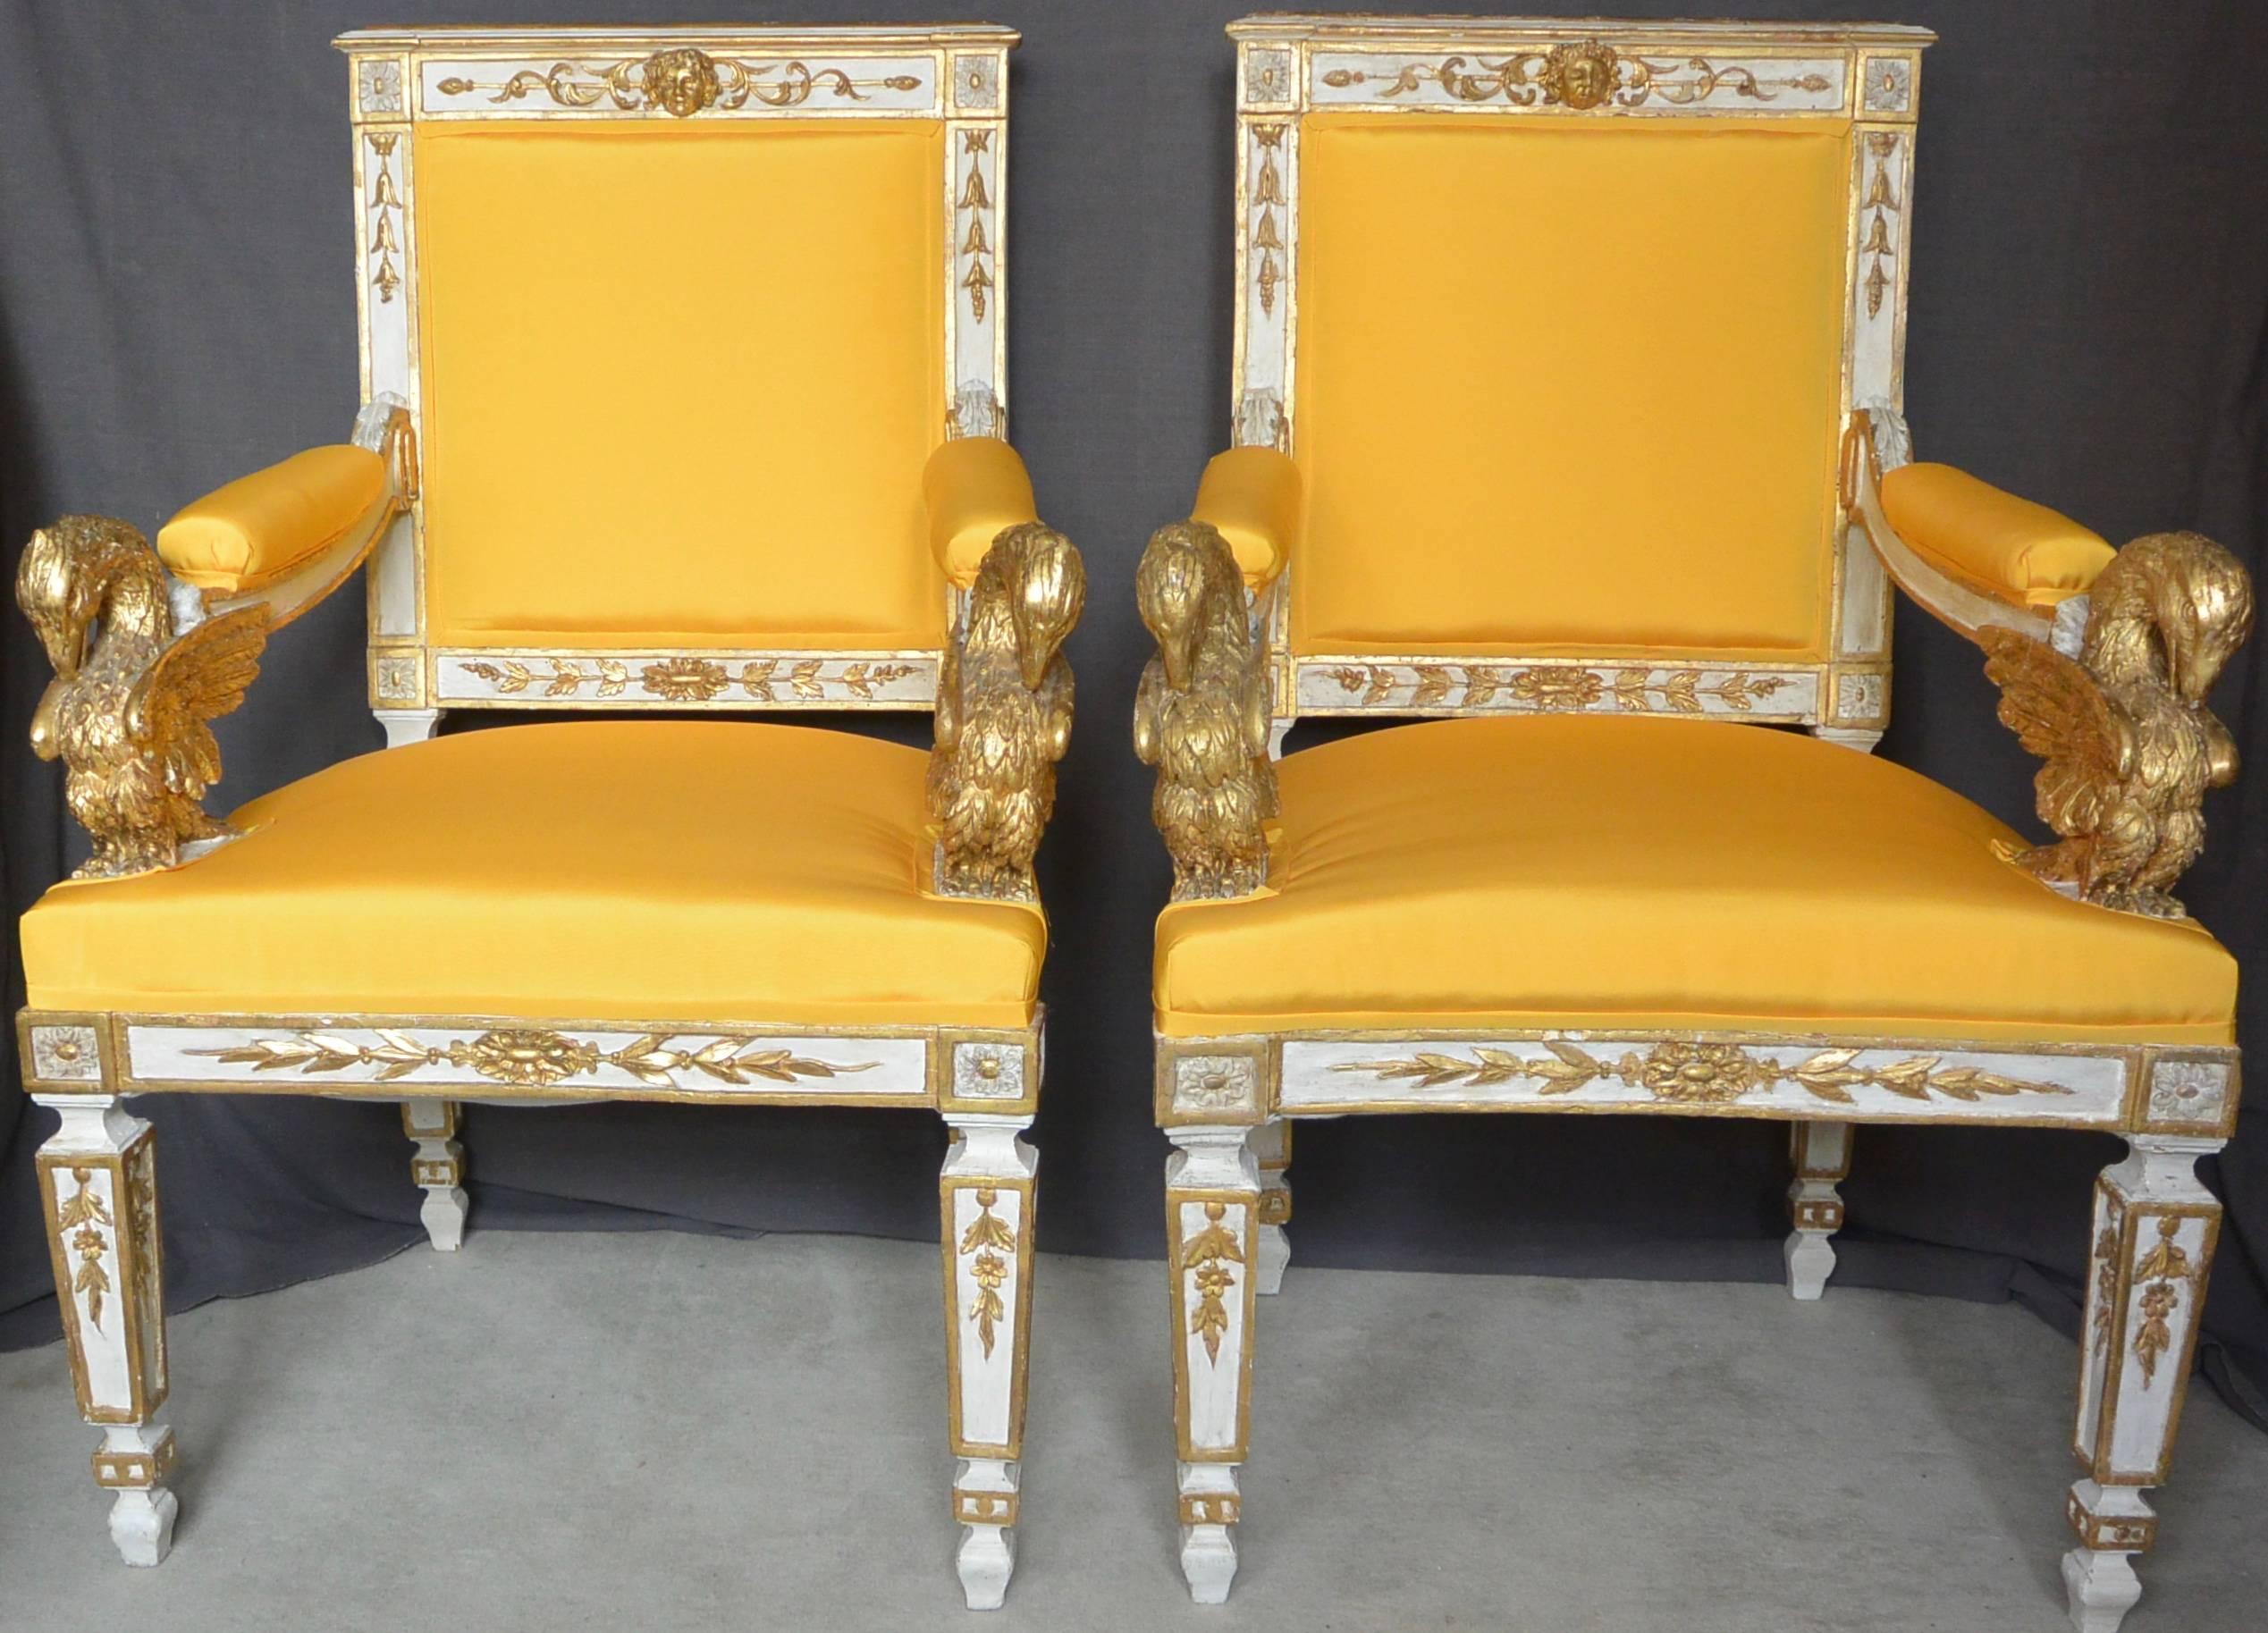 Pair eagle armchairs in yellow taffeta. Italian Empire painted and parcel-gilt carved armchairs with finely carved eagle arm terminals and yellow Italian silk taffeta. Newly re-upholstered and re-enforced, Northern Italy, early 1800s. 
Dimension: